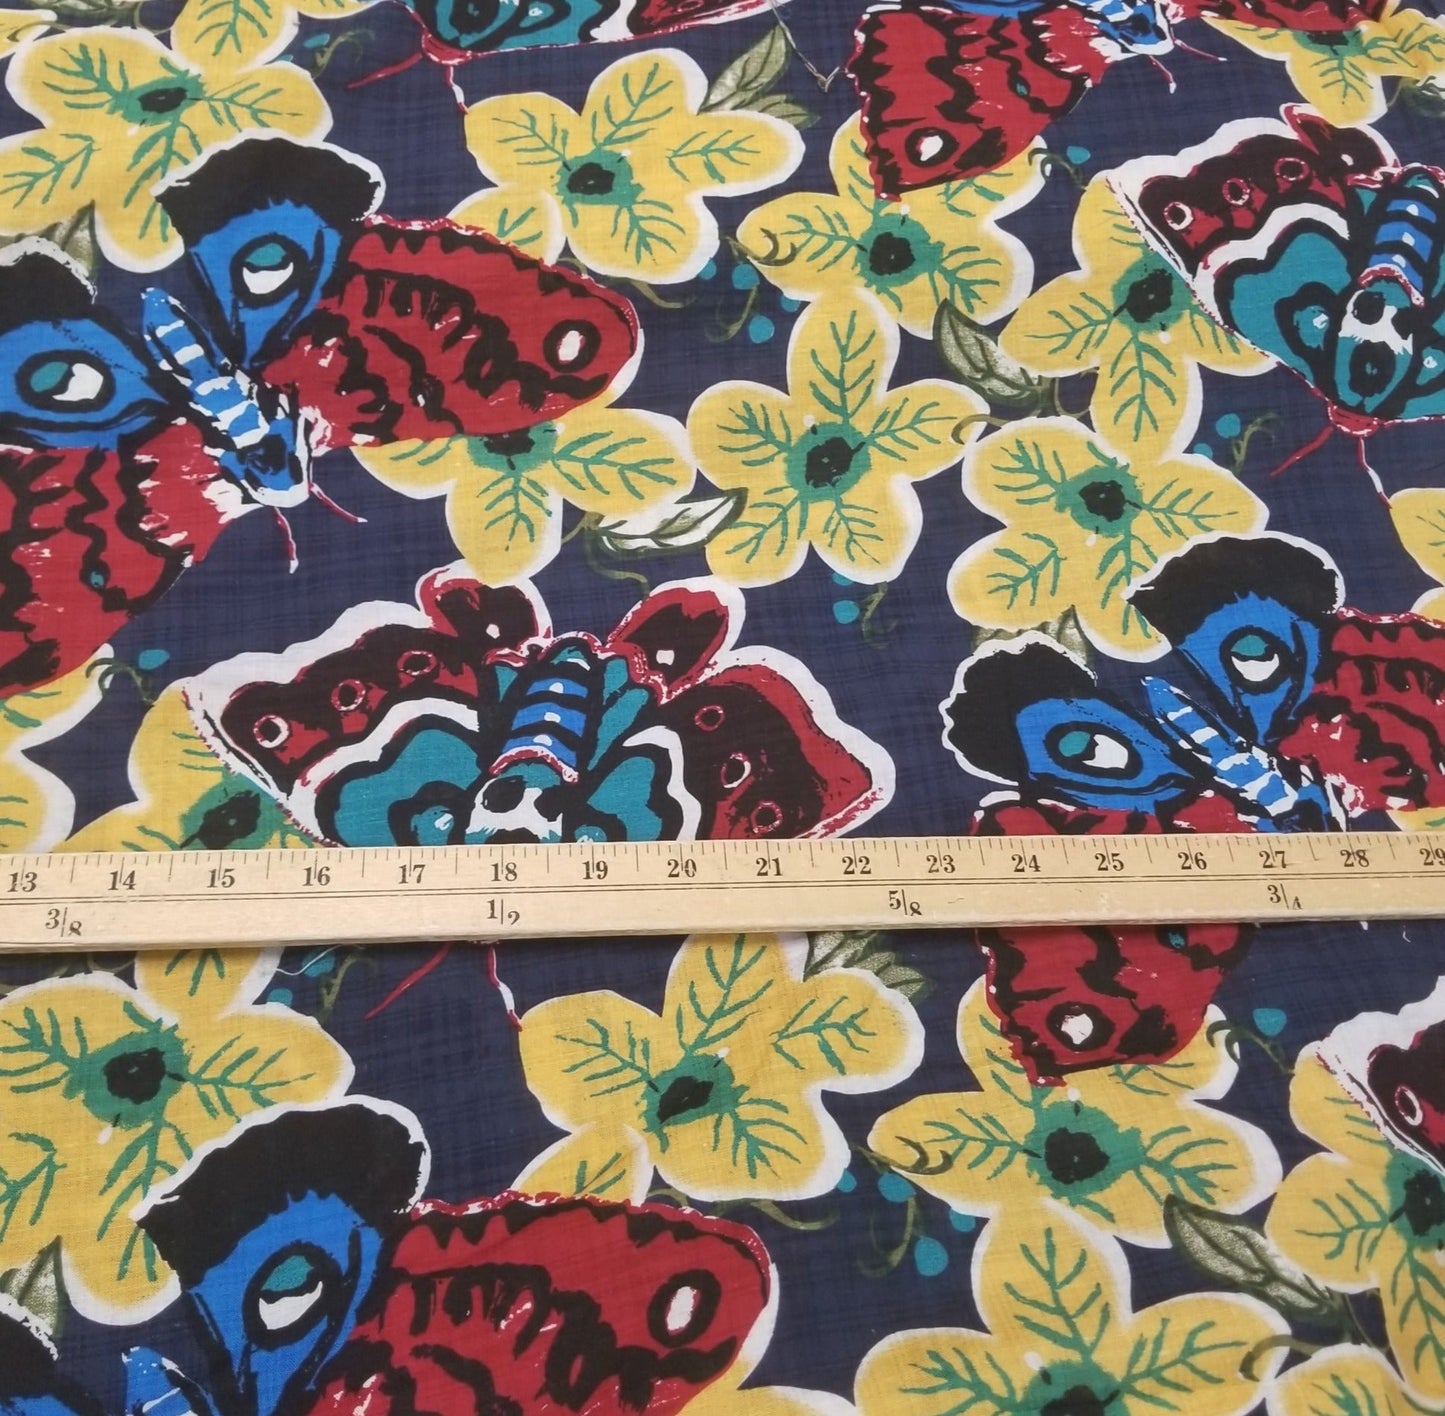 End of BOlt: 4 yards of Designer Deadstock Navy Cross Hatch Yellow Floral Cotton Lawn 2.36 oz - remnant